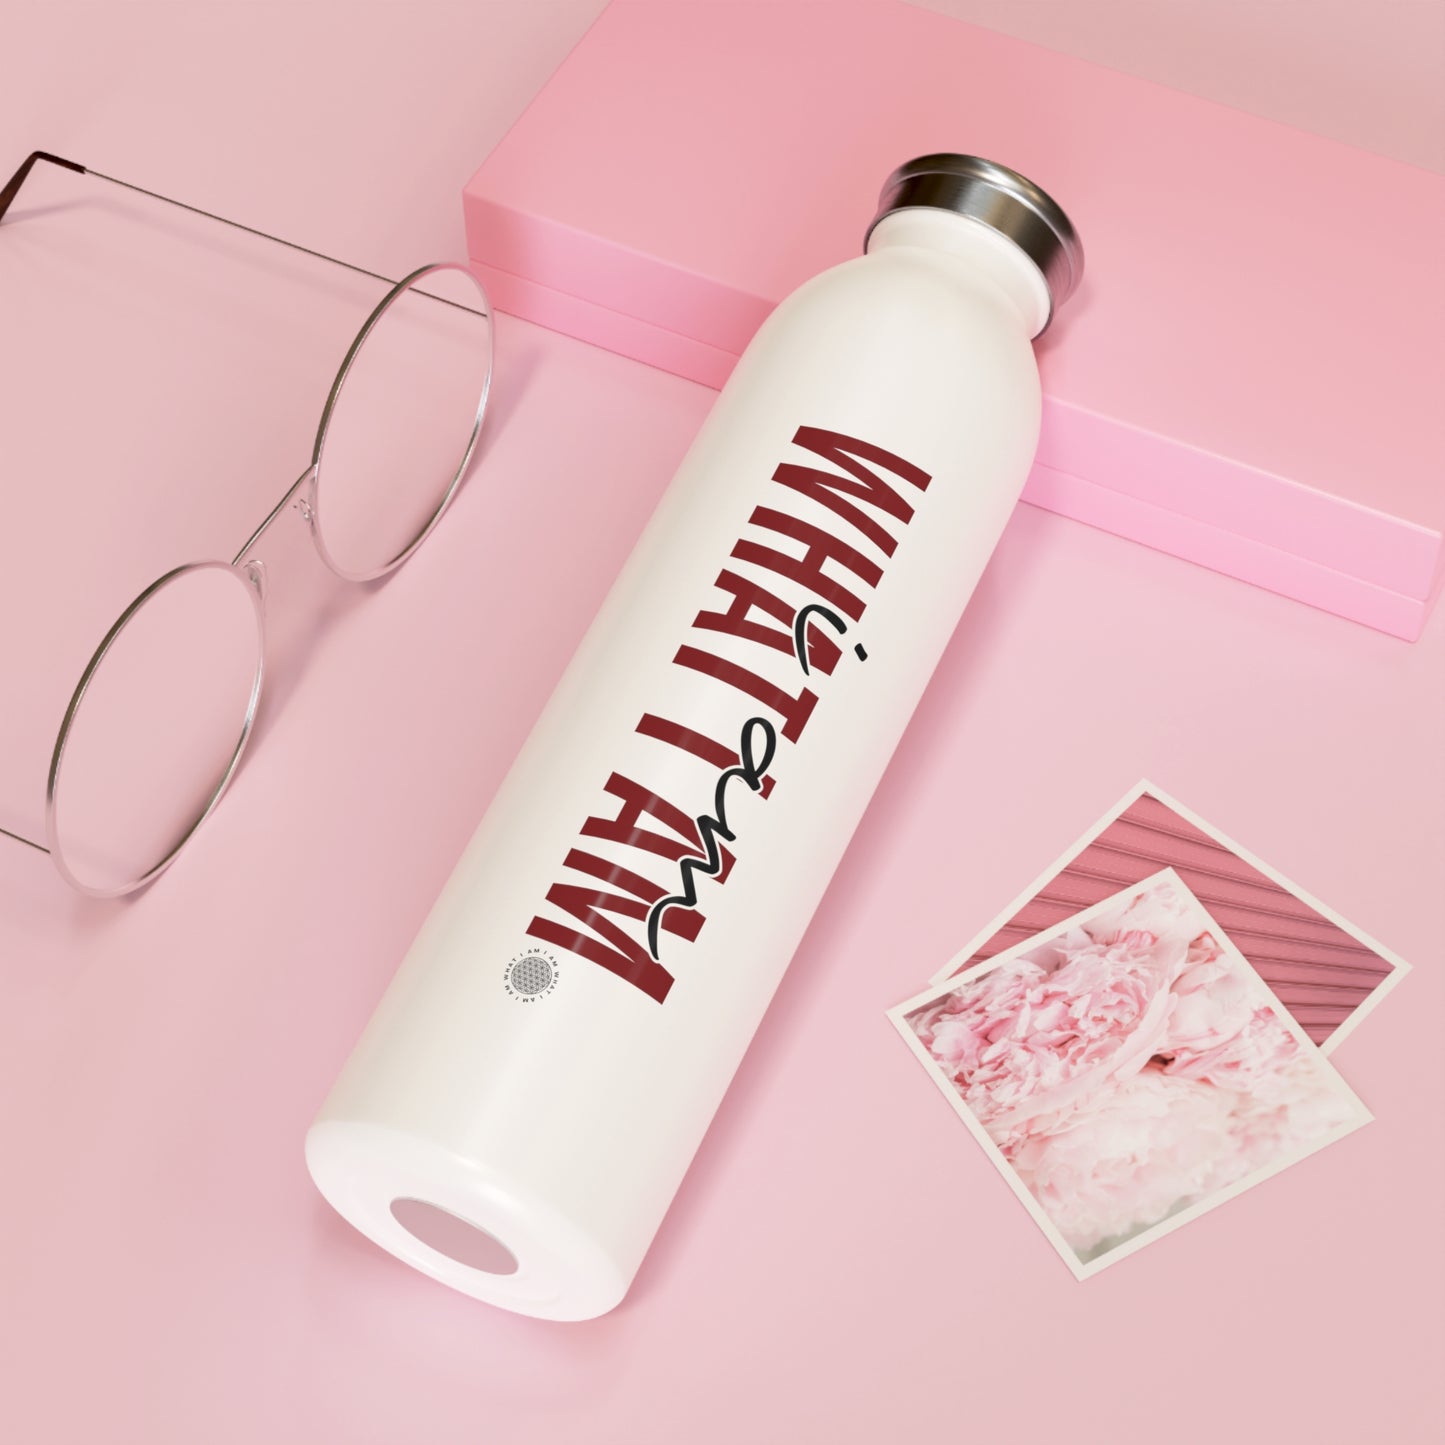 Our I Am What I Am is the perfect bottle for everyone. We should all stand strong and be proud of who we are. With 20oz capacity, a fashionable lid, and a double-wall stainless steel frame, this water bottle utilizes vacuum insulation to keep both hot and cold drinks at perfect temps, for hours on end. 